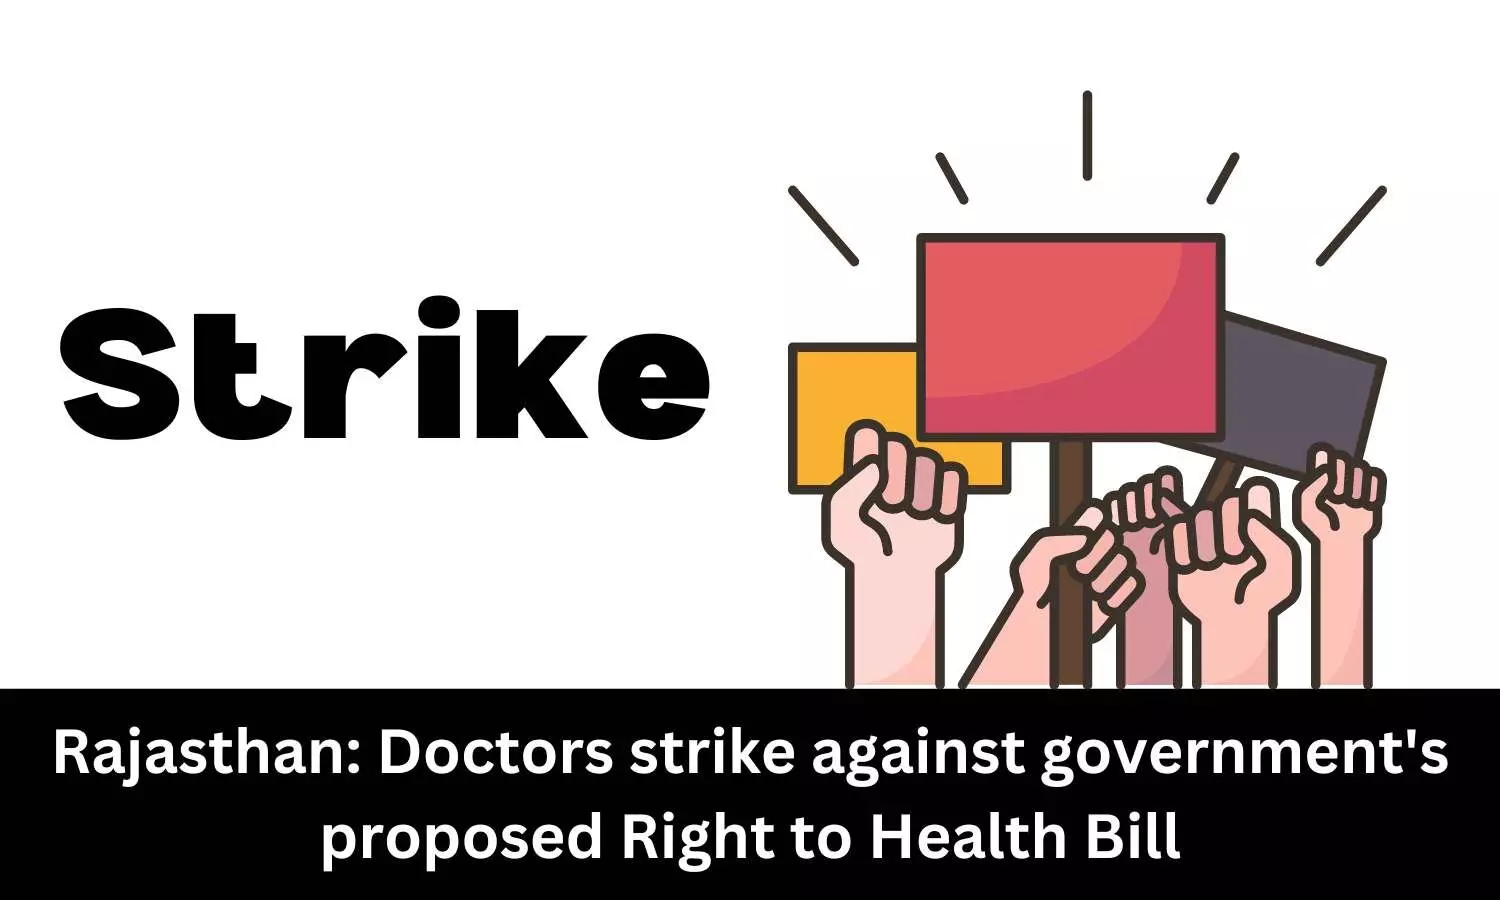 Rajasthan: Doctors strike against government proposed Right to Health Bill